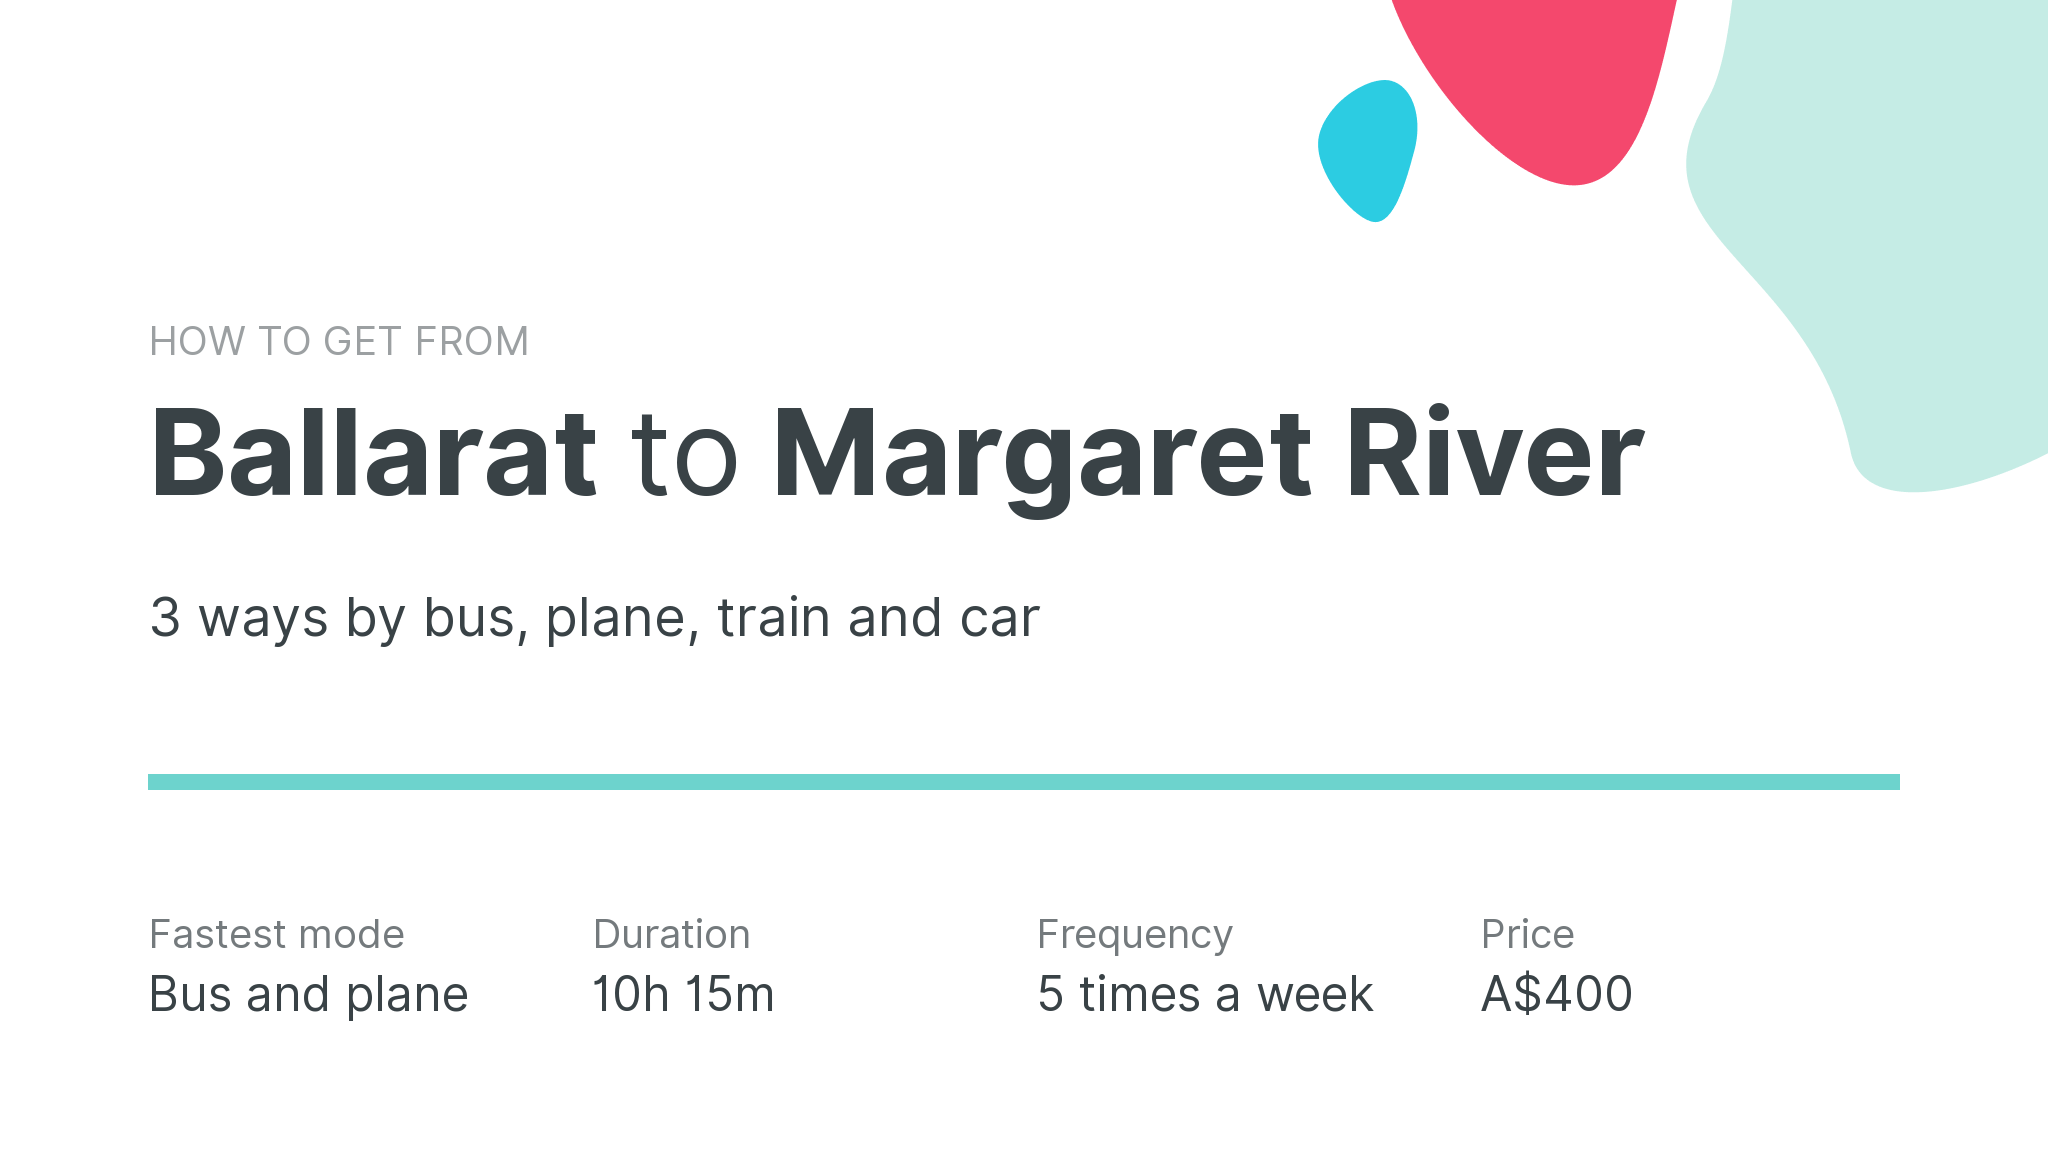 How do I get from Ballarat to Margaret River